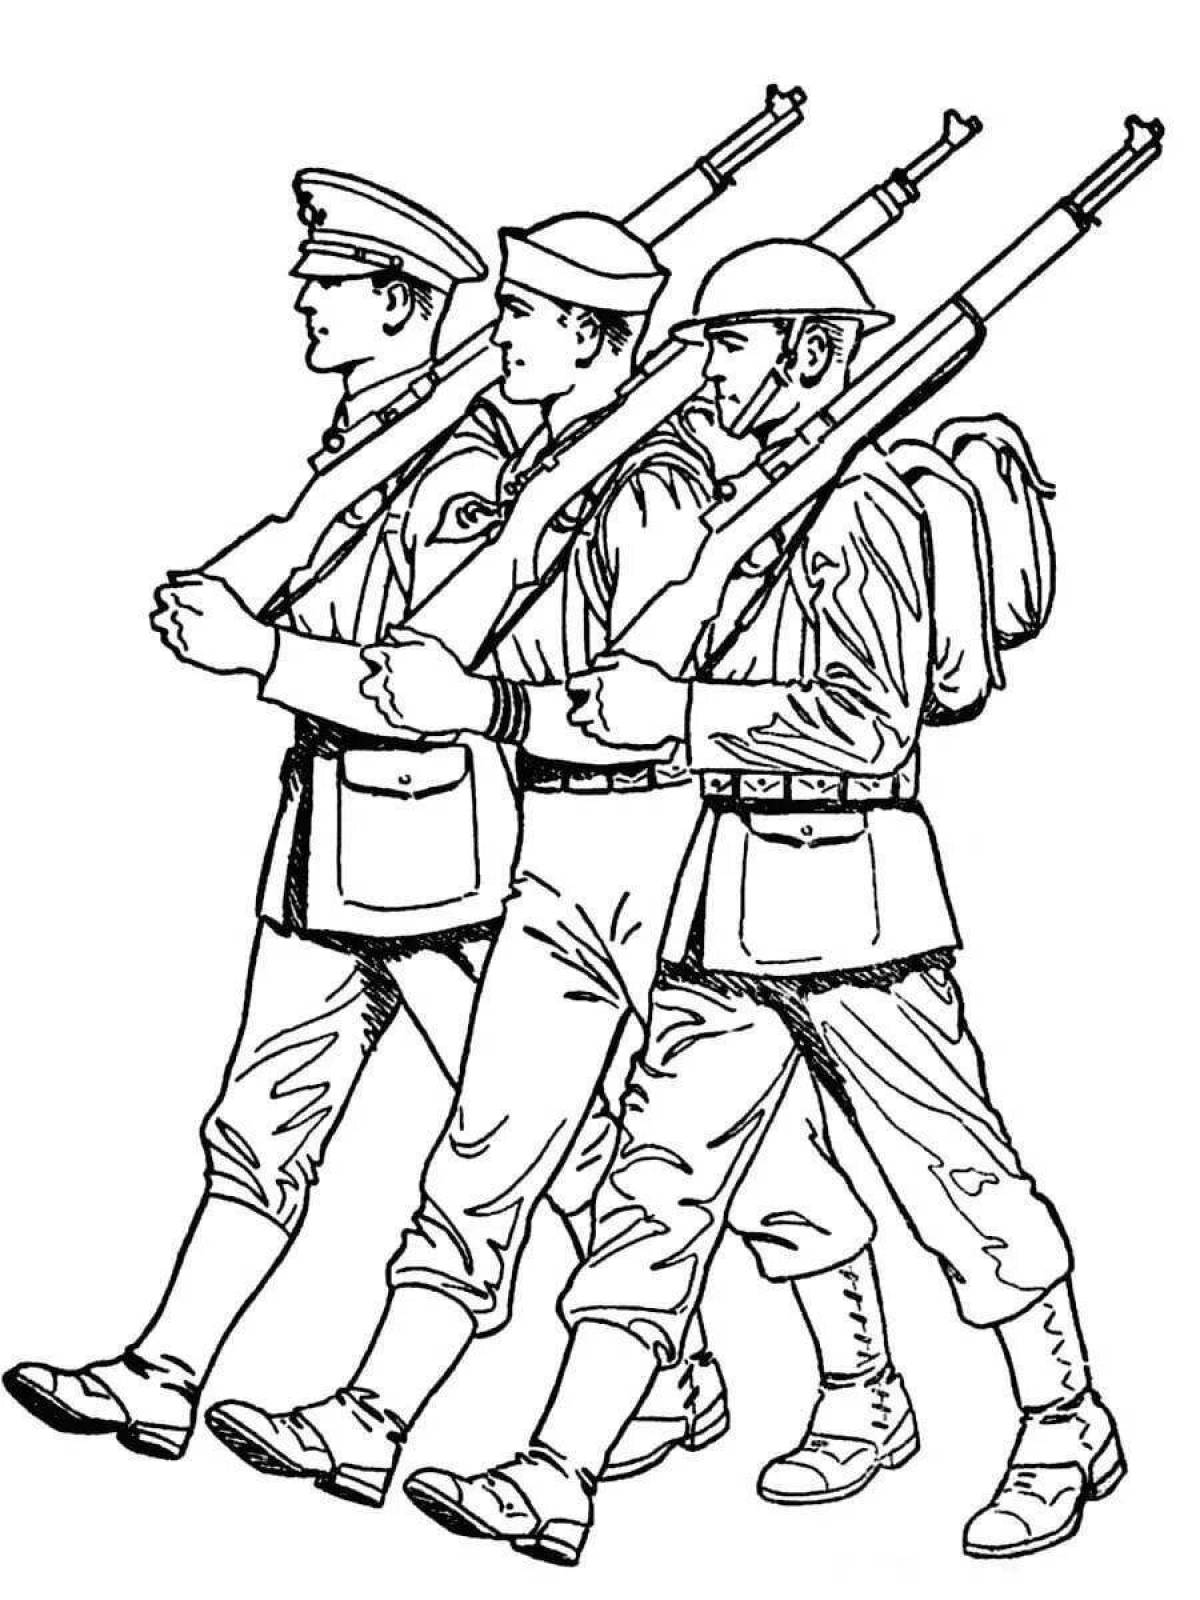 Soldiers coloring pages for kids